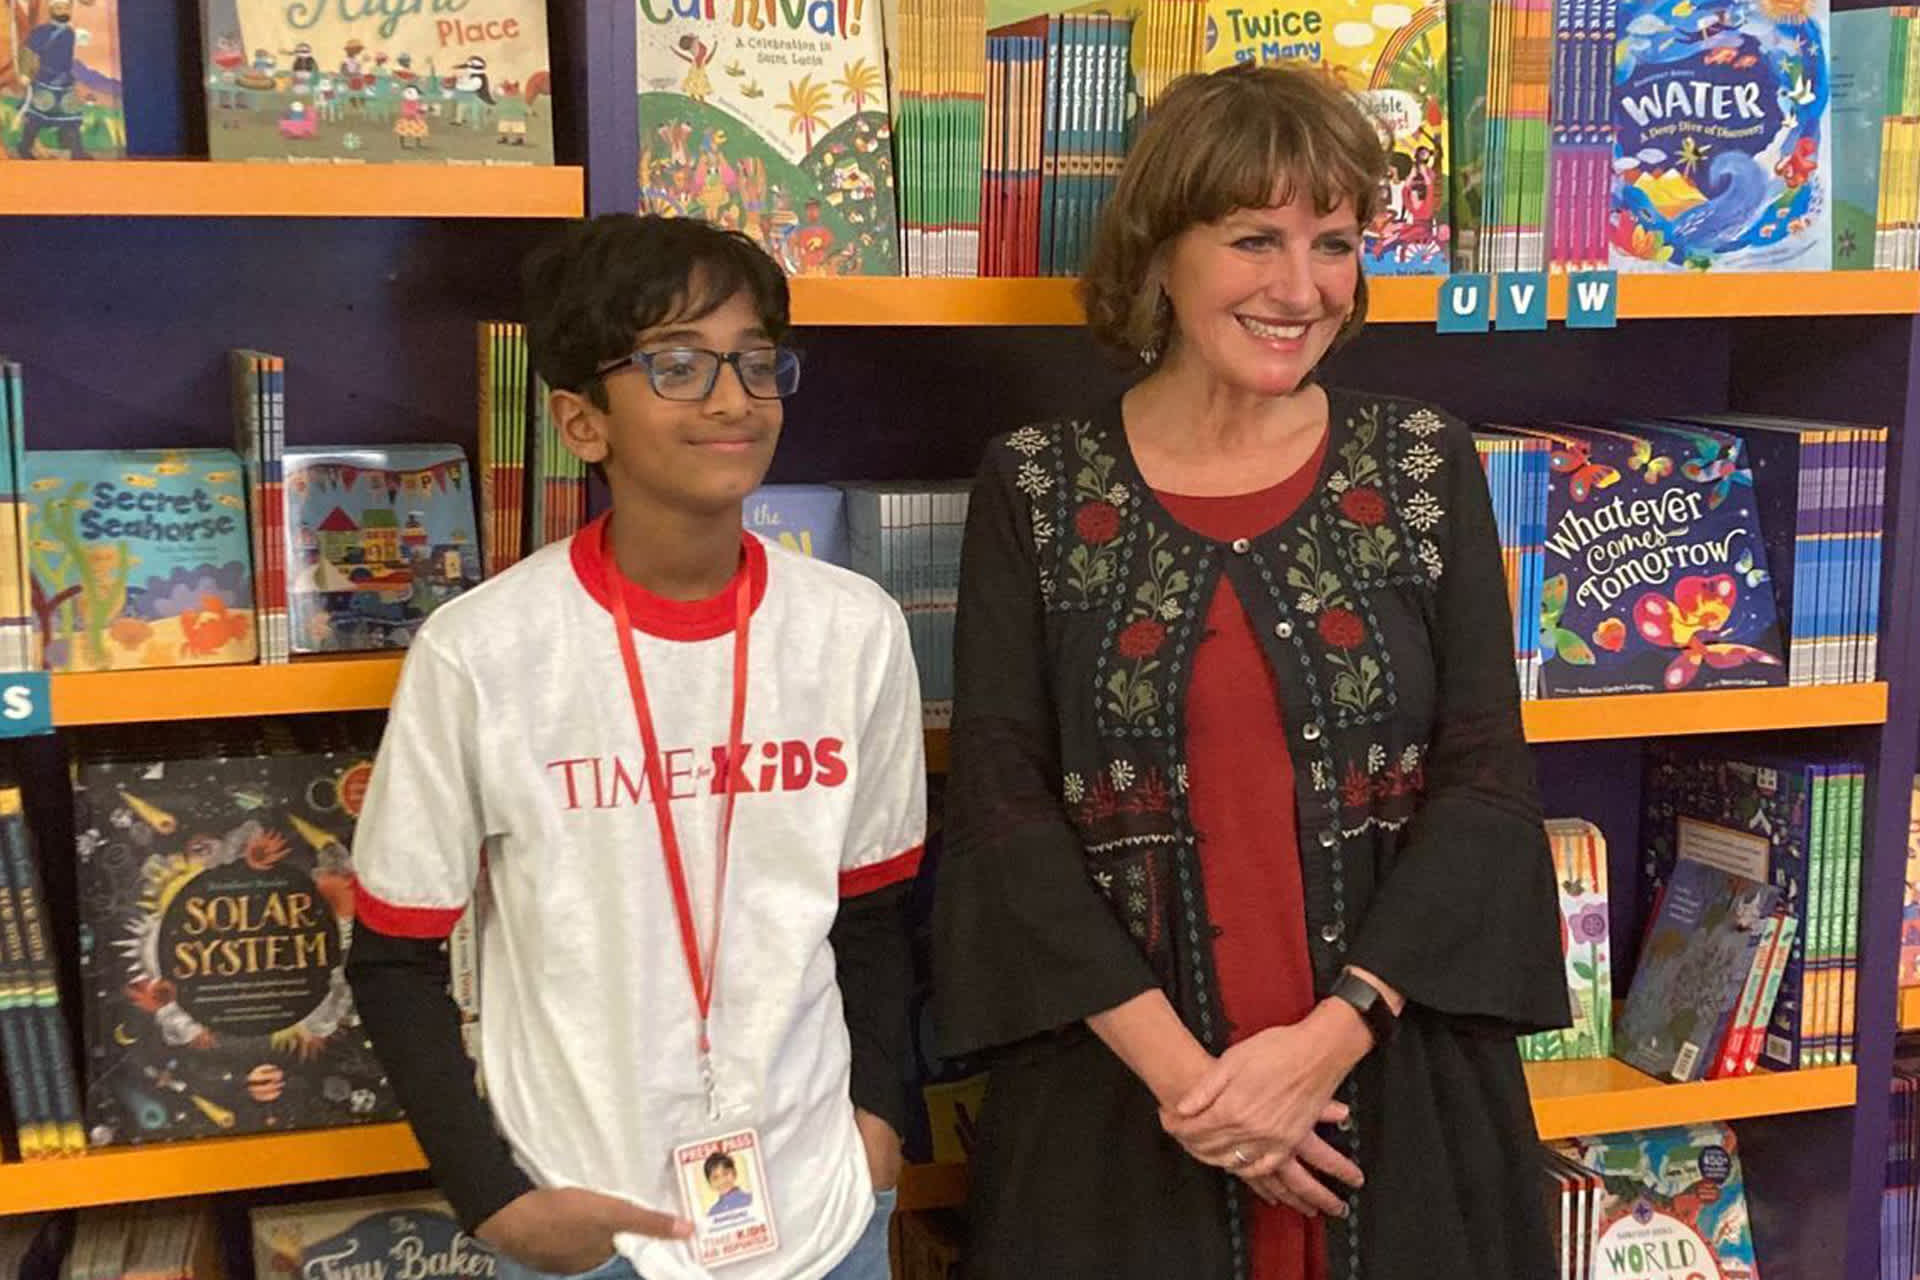 A boy and woman standing in front of bookshelves, smiling